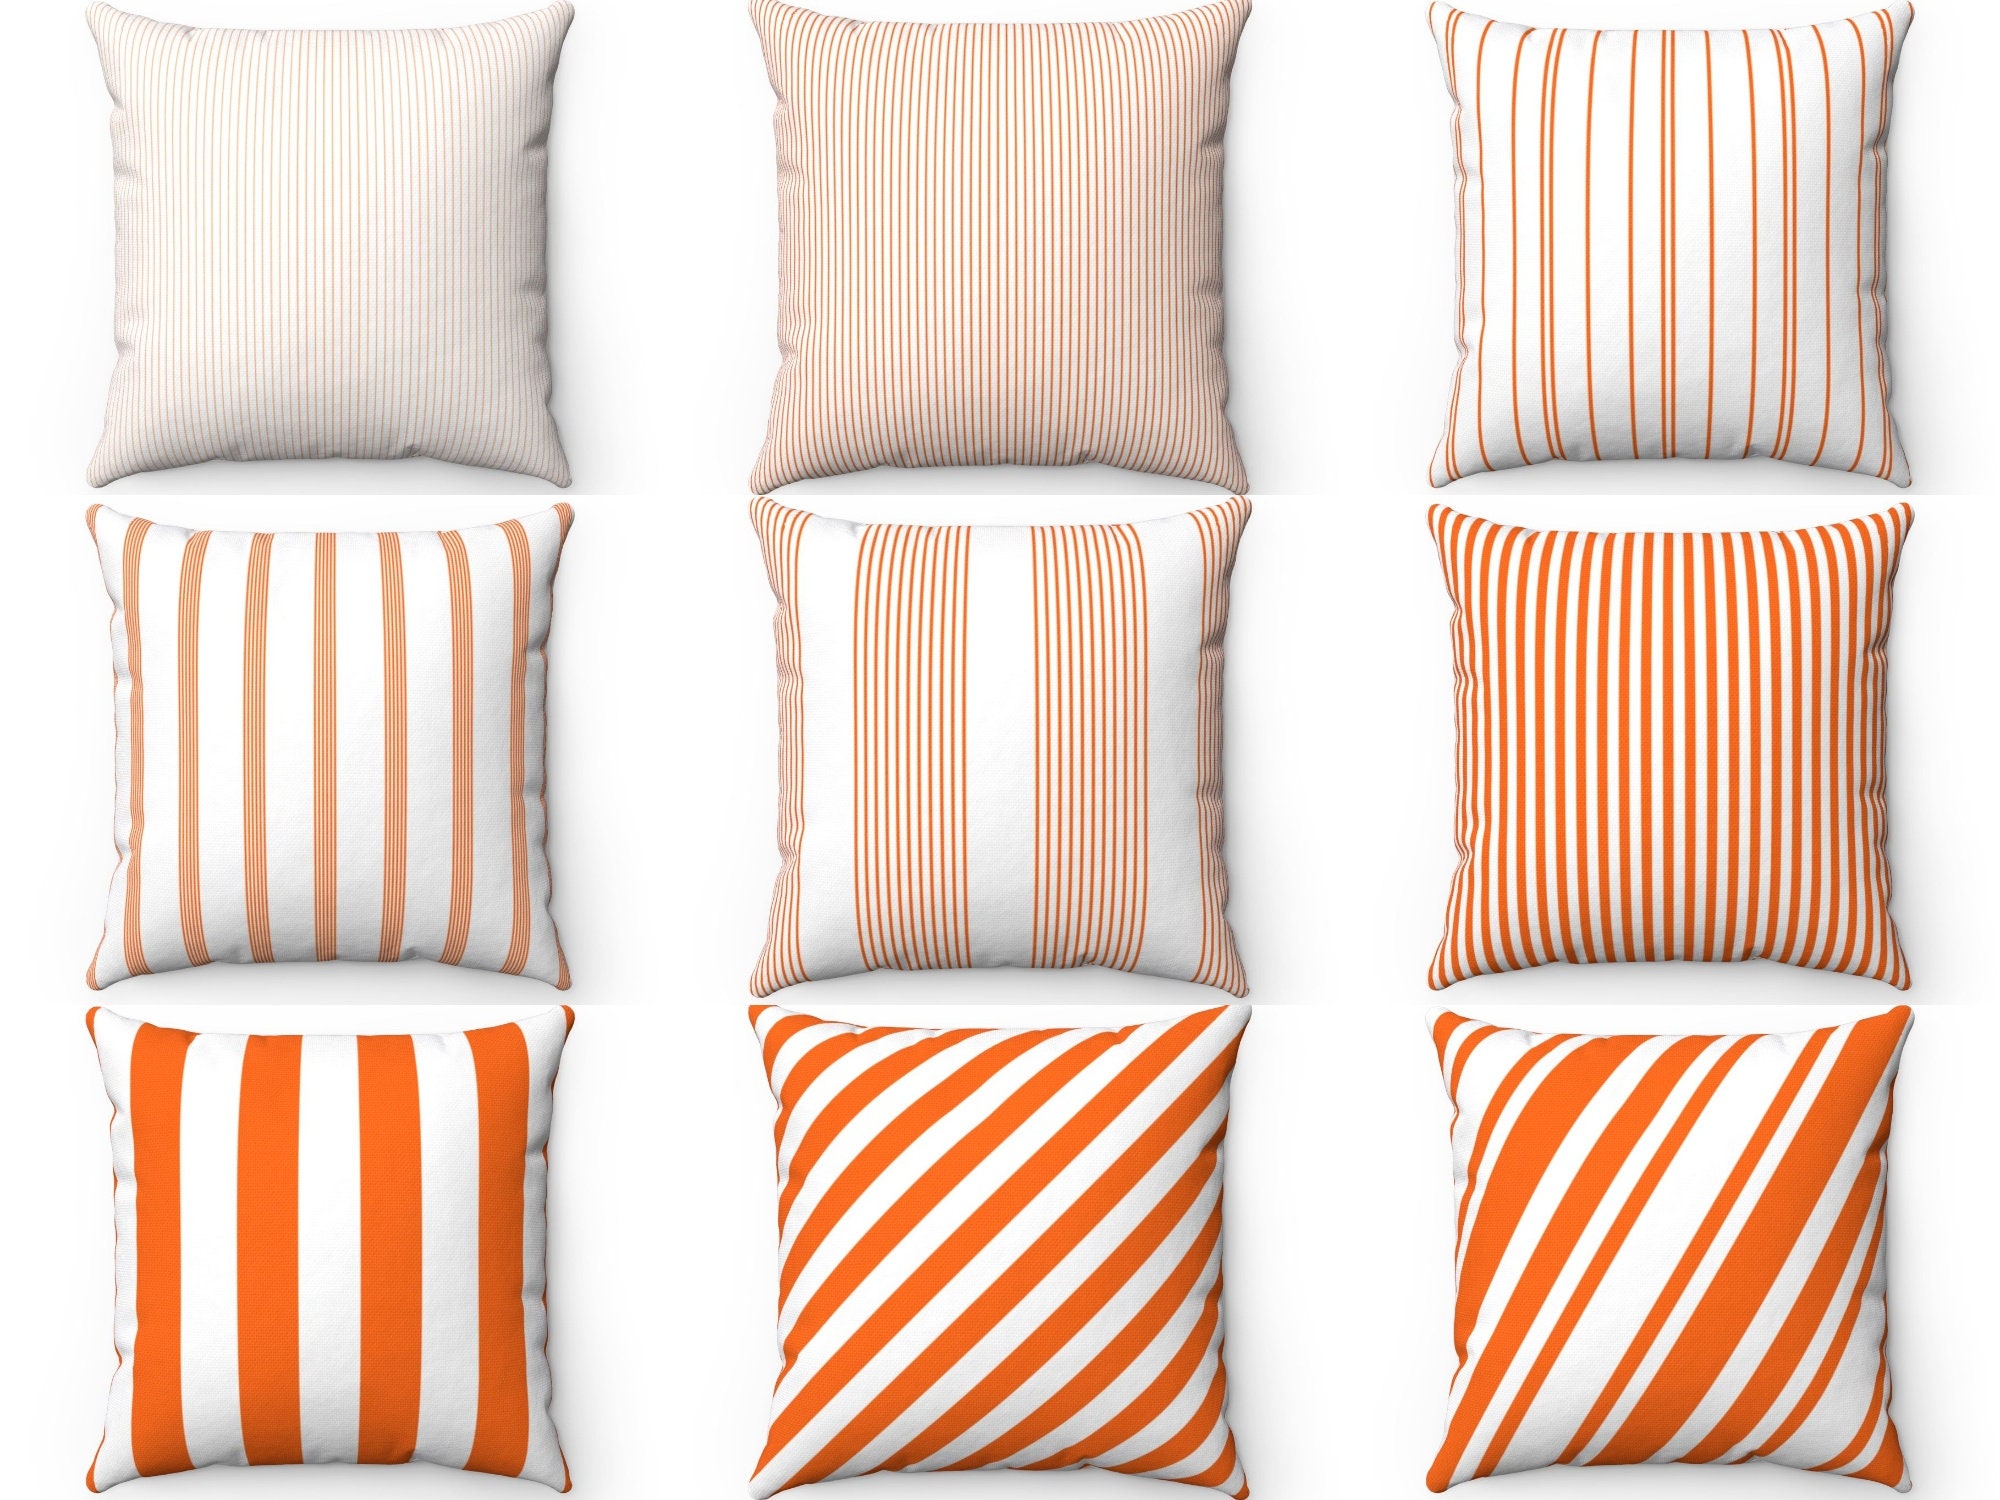 Gerich 18x18 inch Square Throw Pillow Covers with Stripes Decorative Pillows  for Living Room Couch Sofa, Orange, Set of 2 